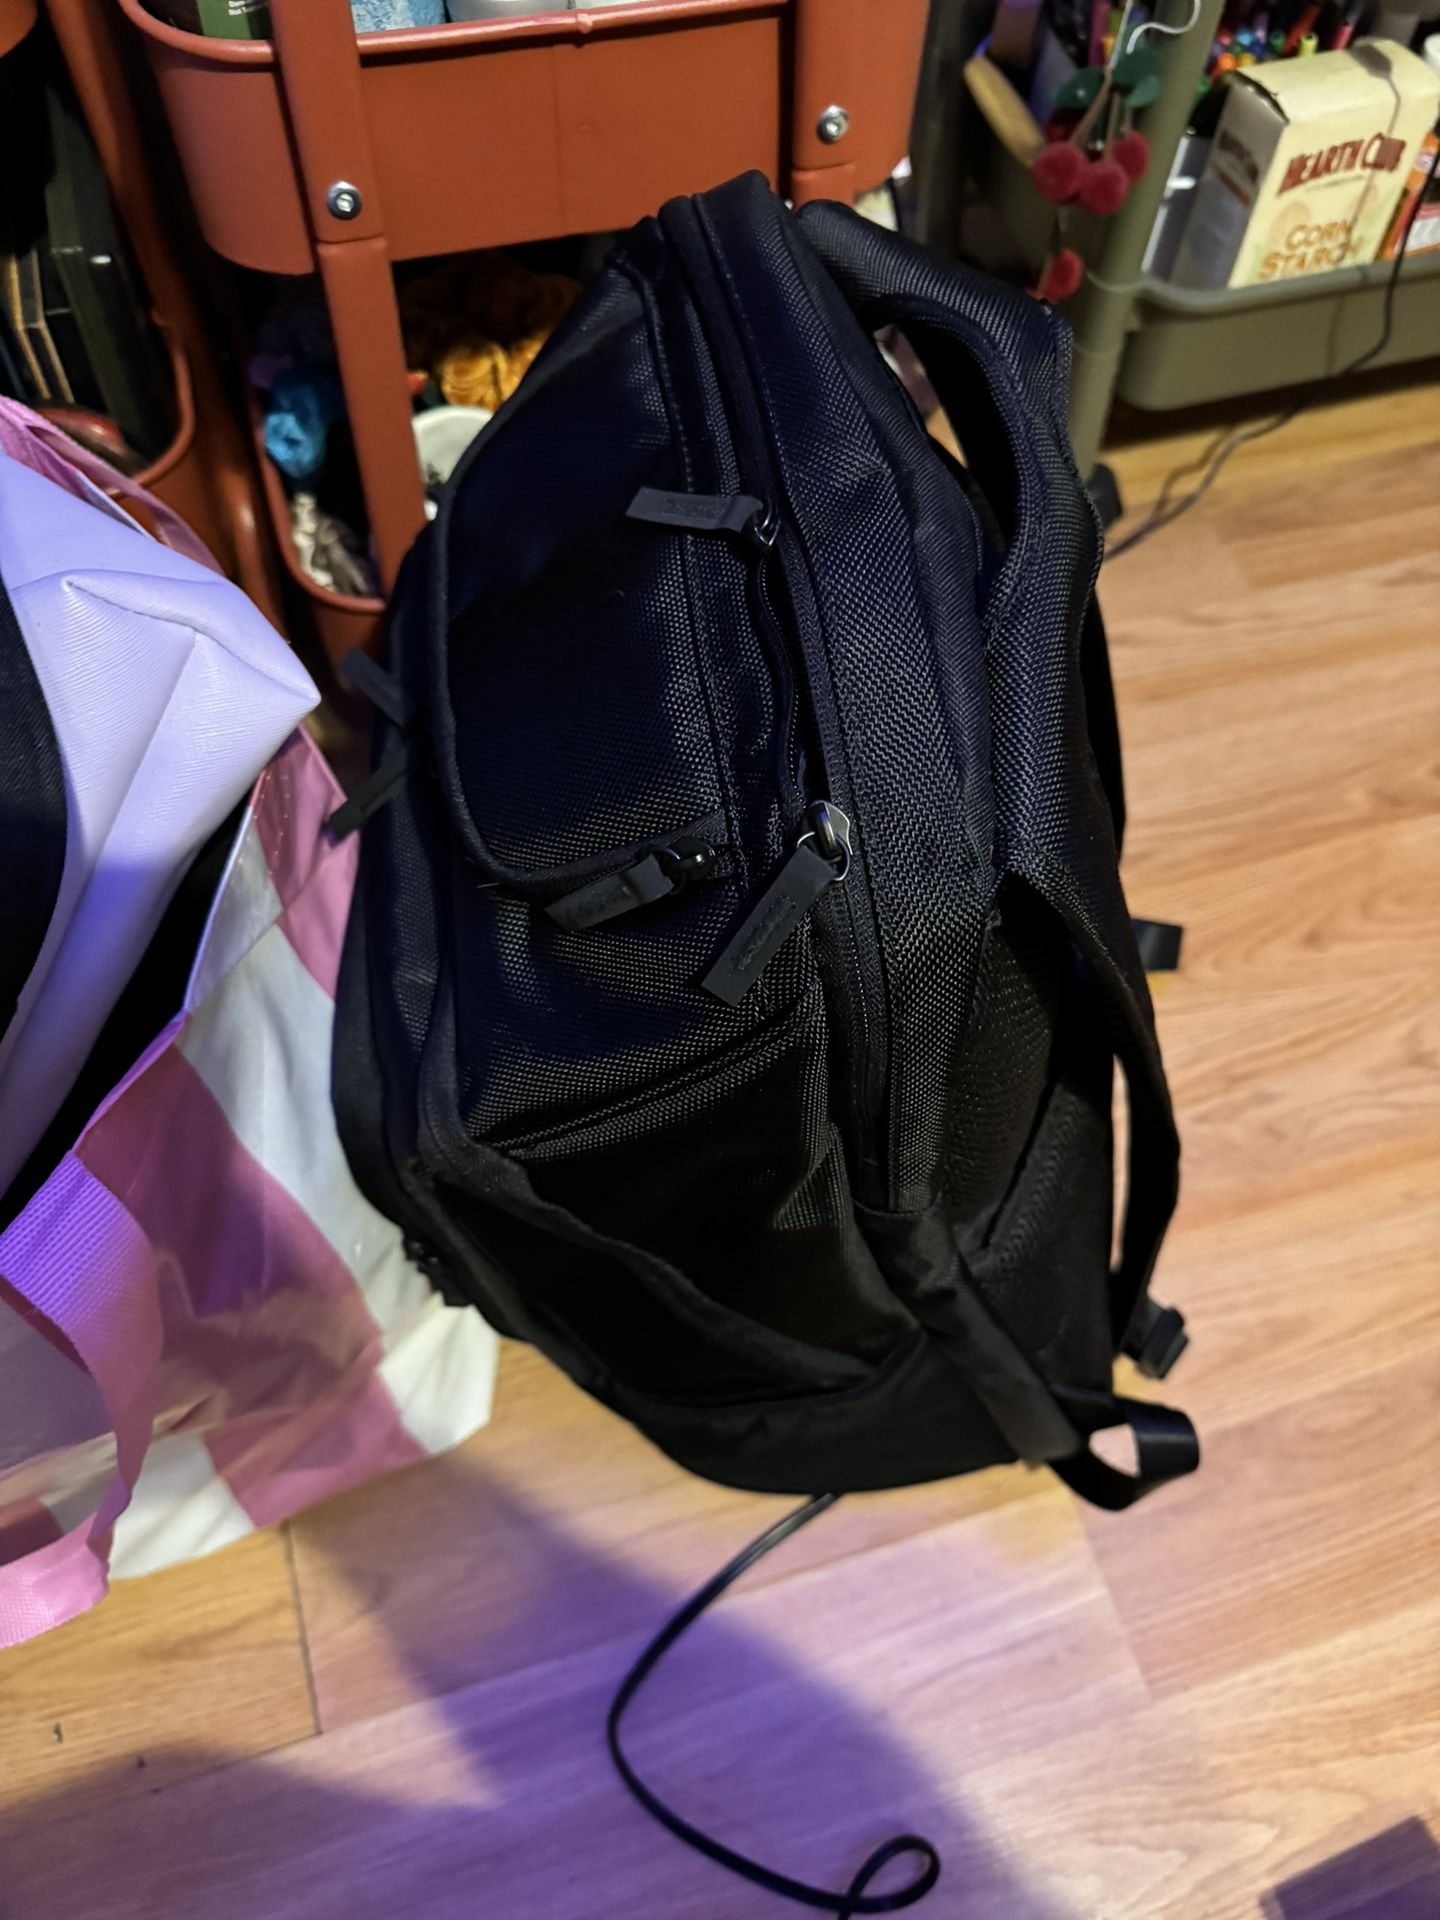 FREE BACKPACK, TOTES, WOMEN CLOTHES & NAIL ART STUFF